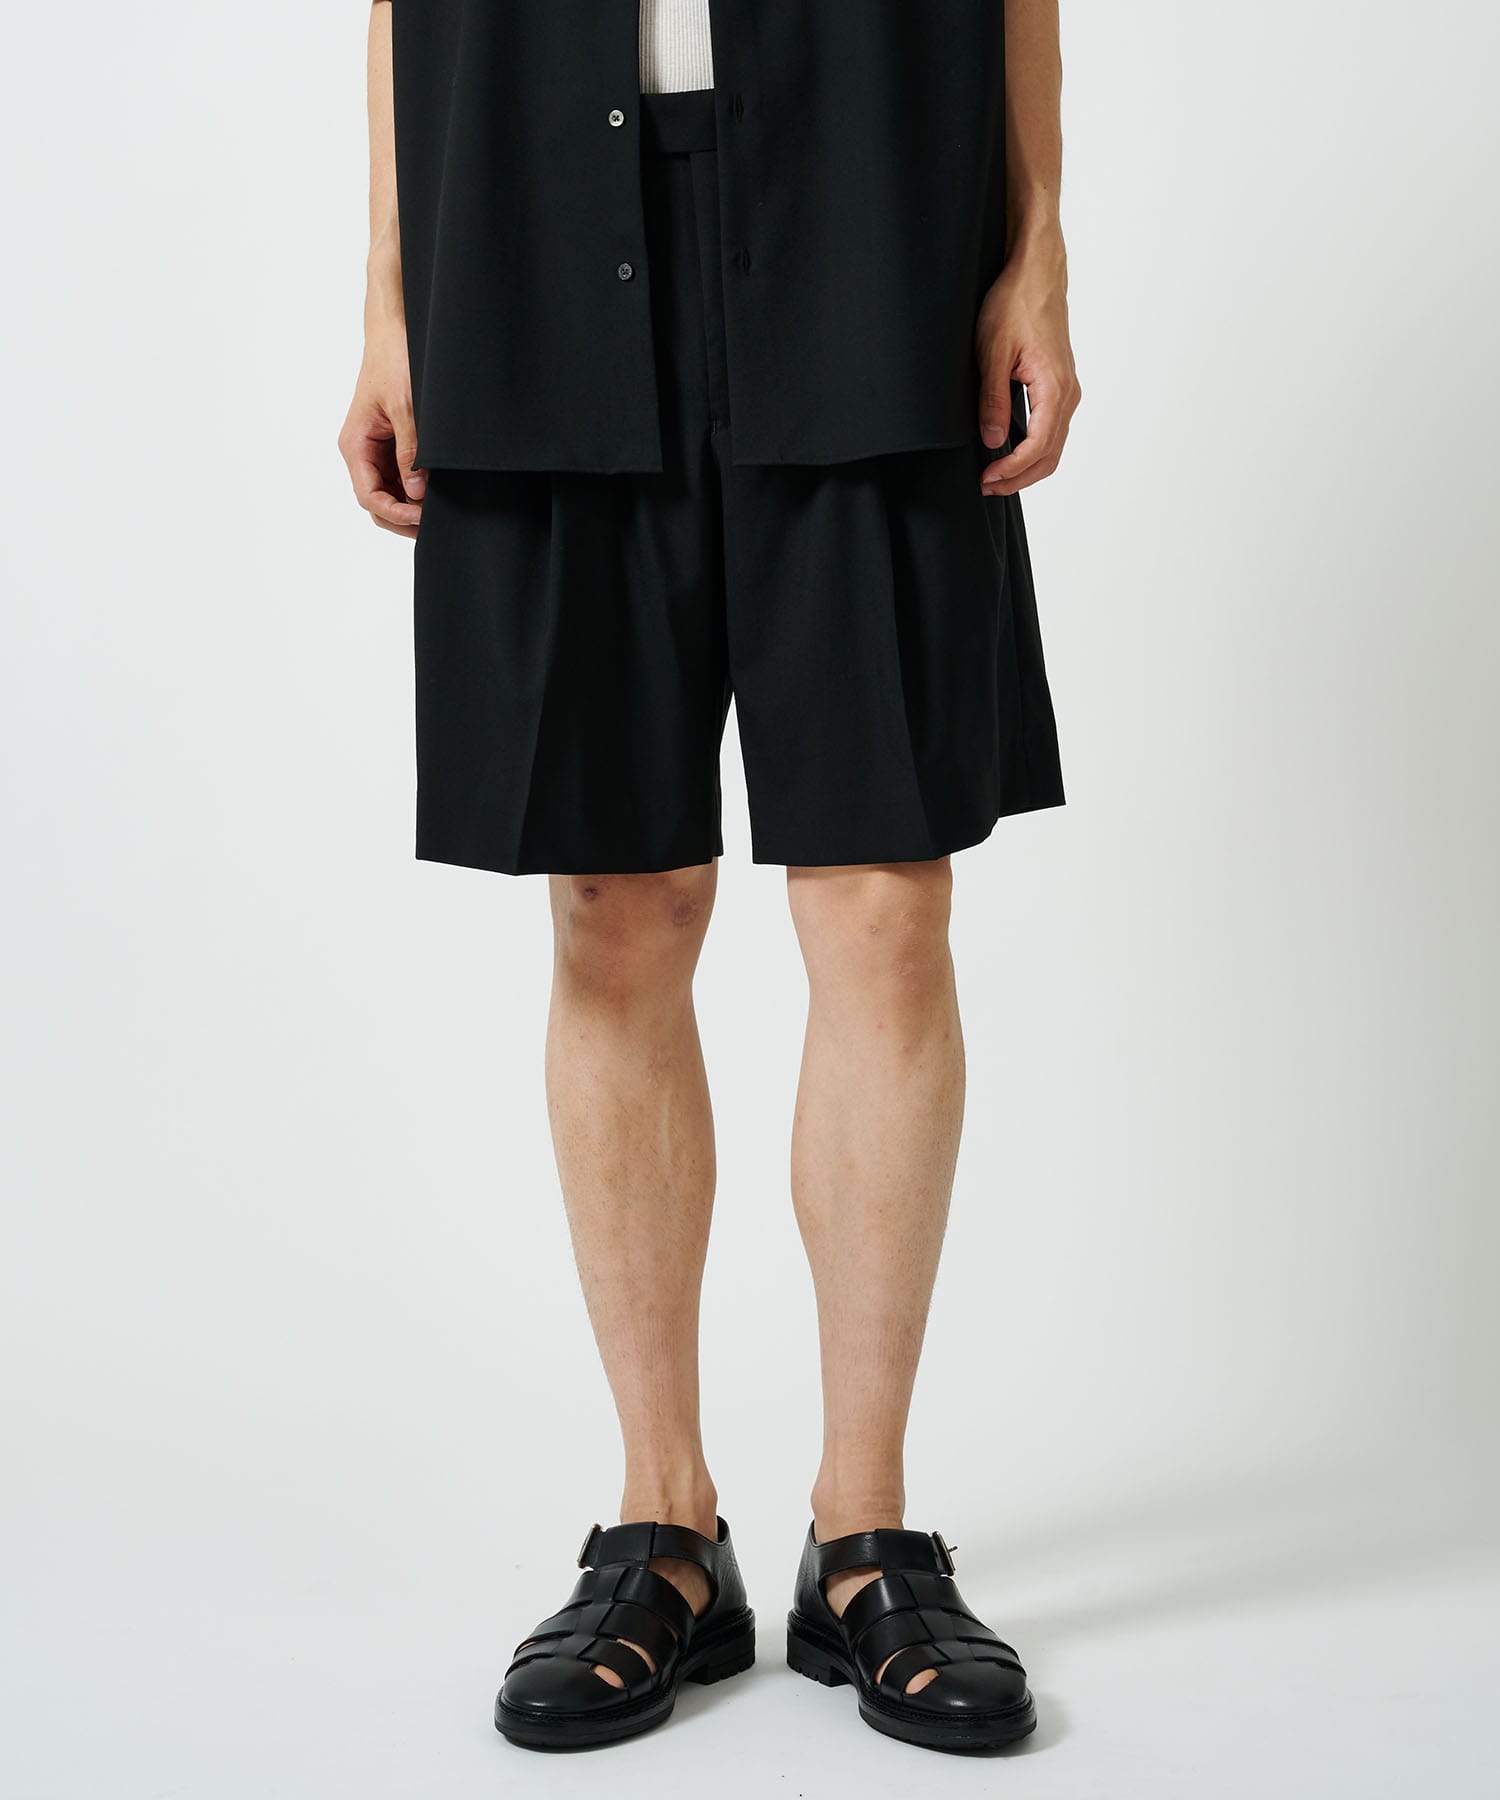 DOUBLE PLEATED CLASSIC WIDE SHORTS